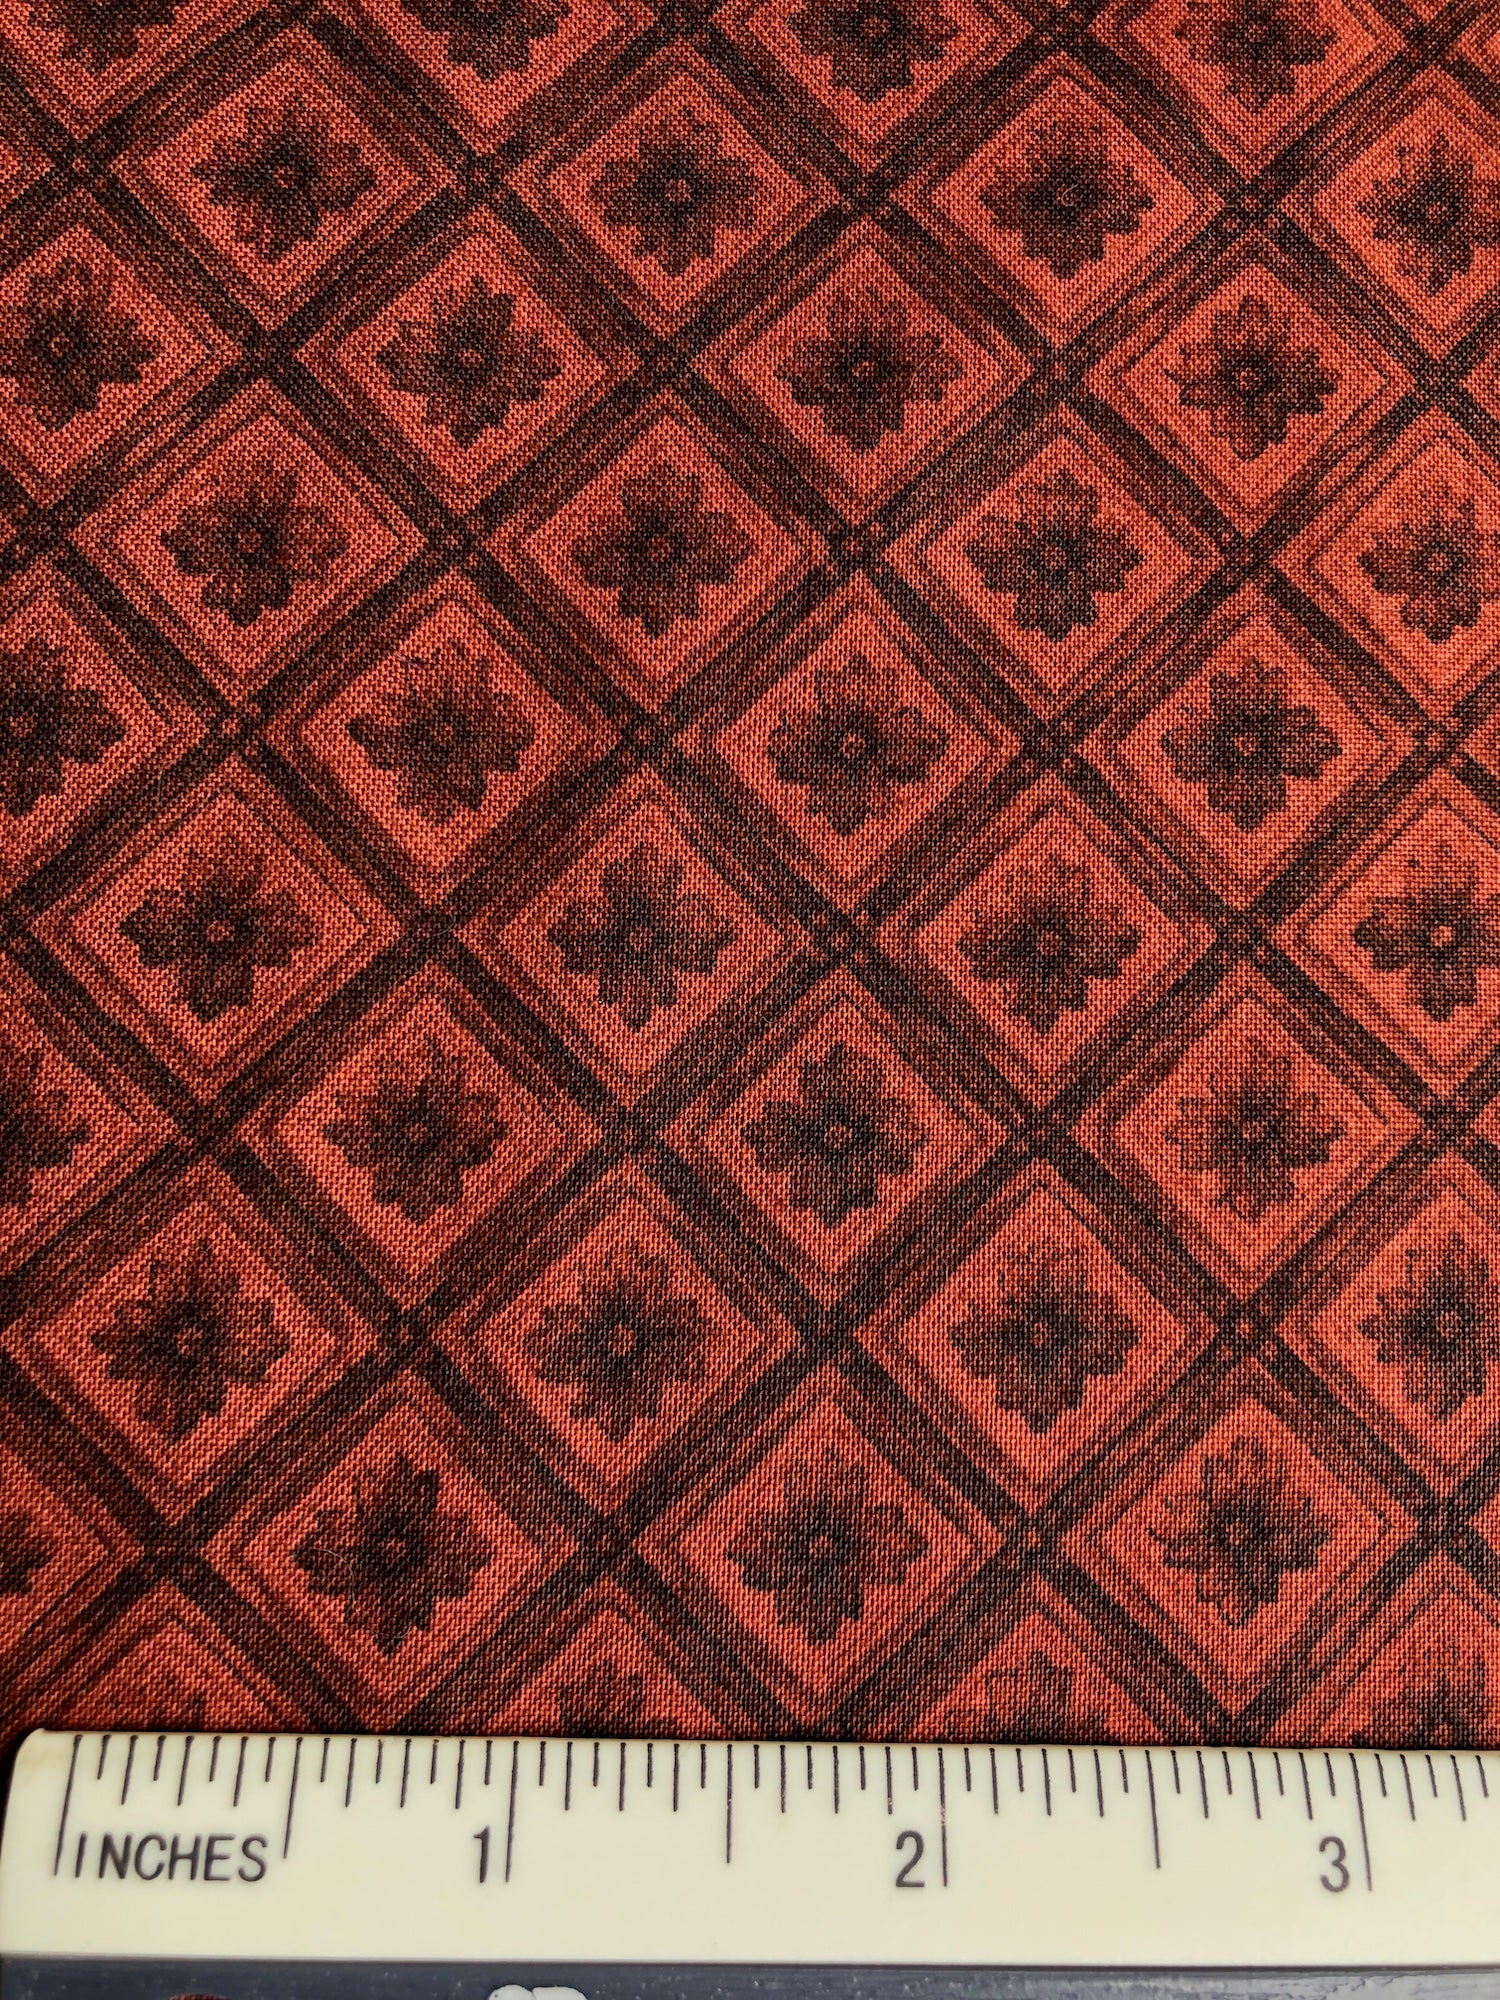 Quilt Gate Mary Rose Collection - FS400 - Red Brown background with a Dark Brown trellis & stylised flower print.